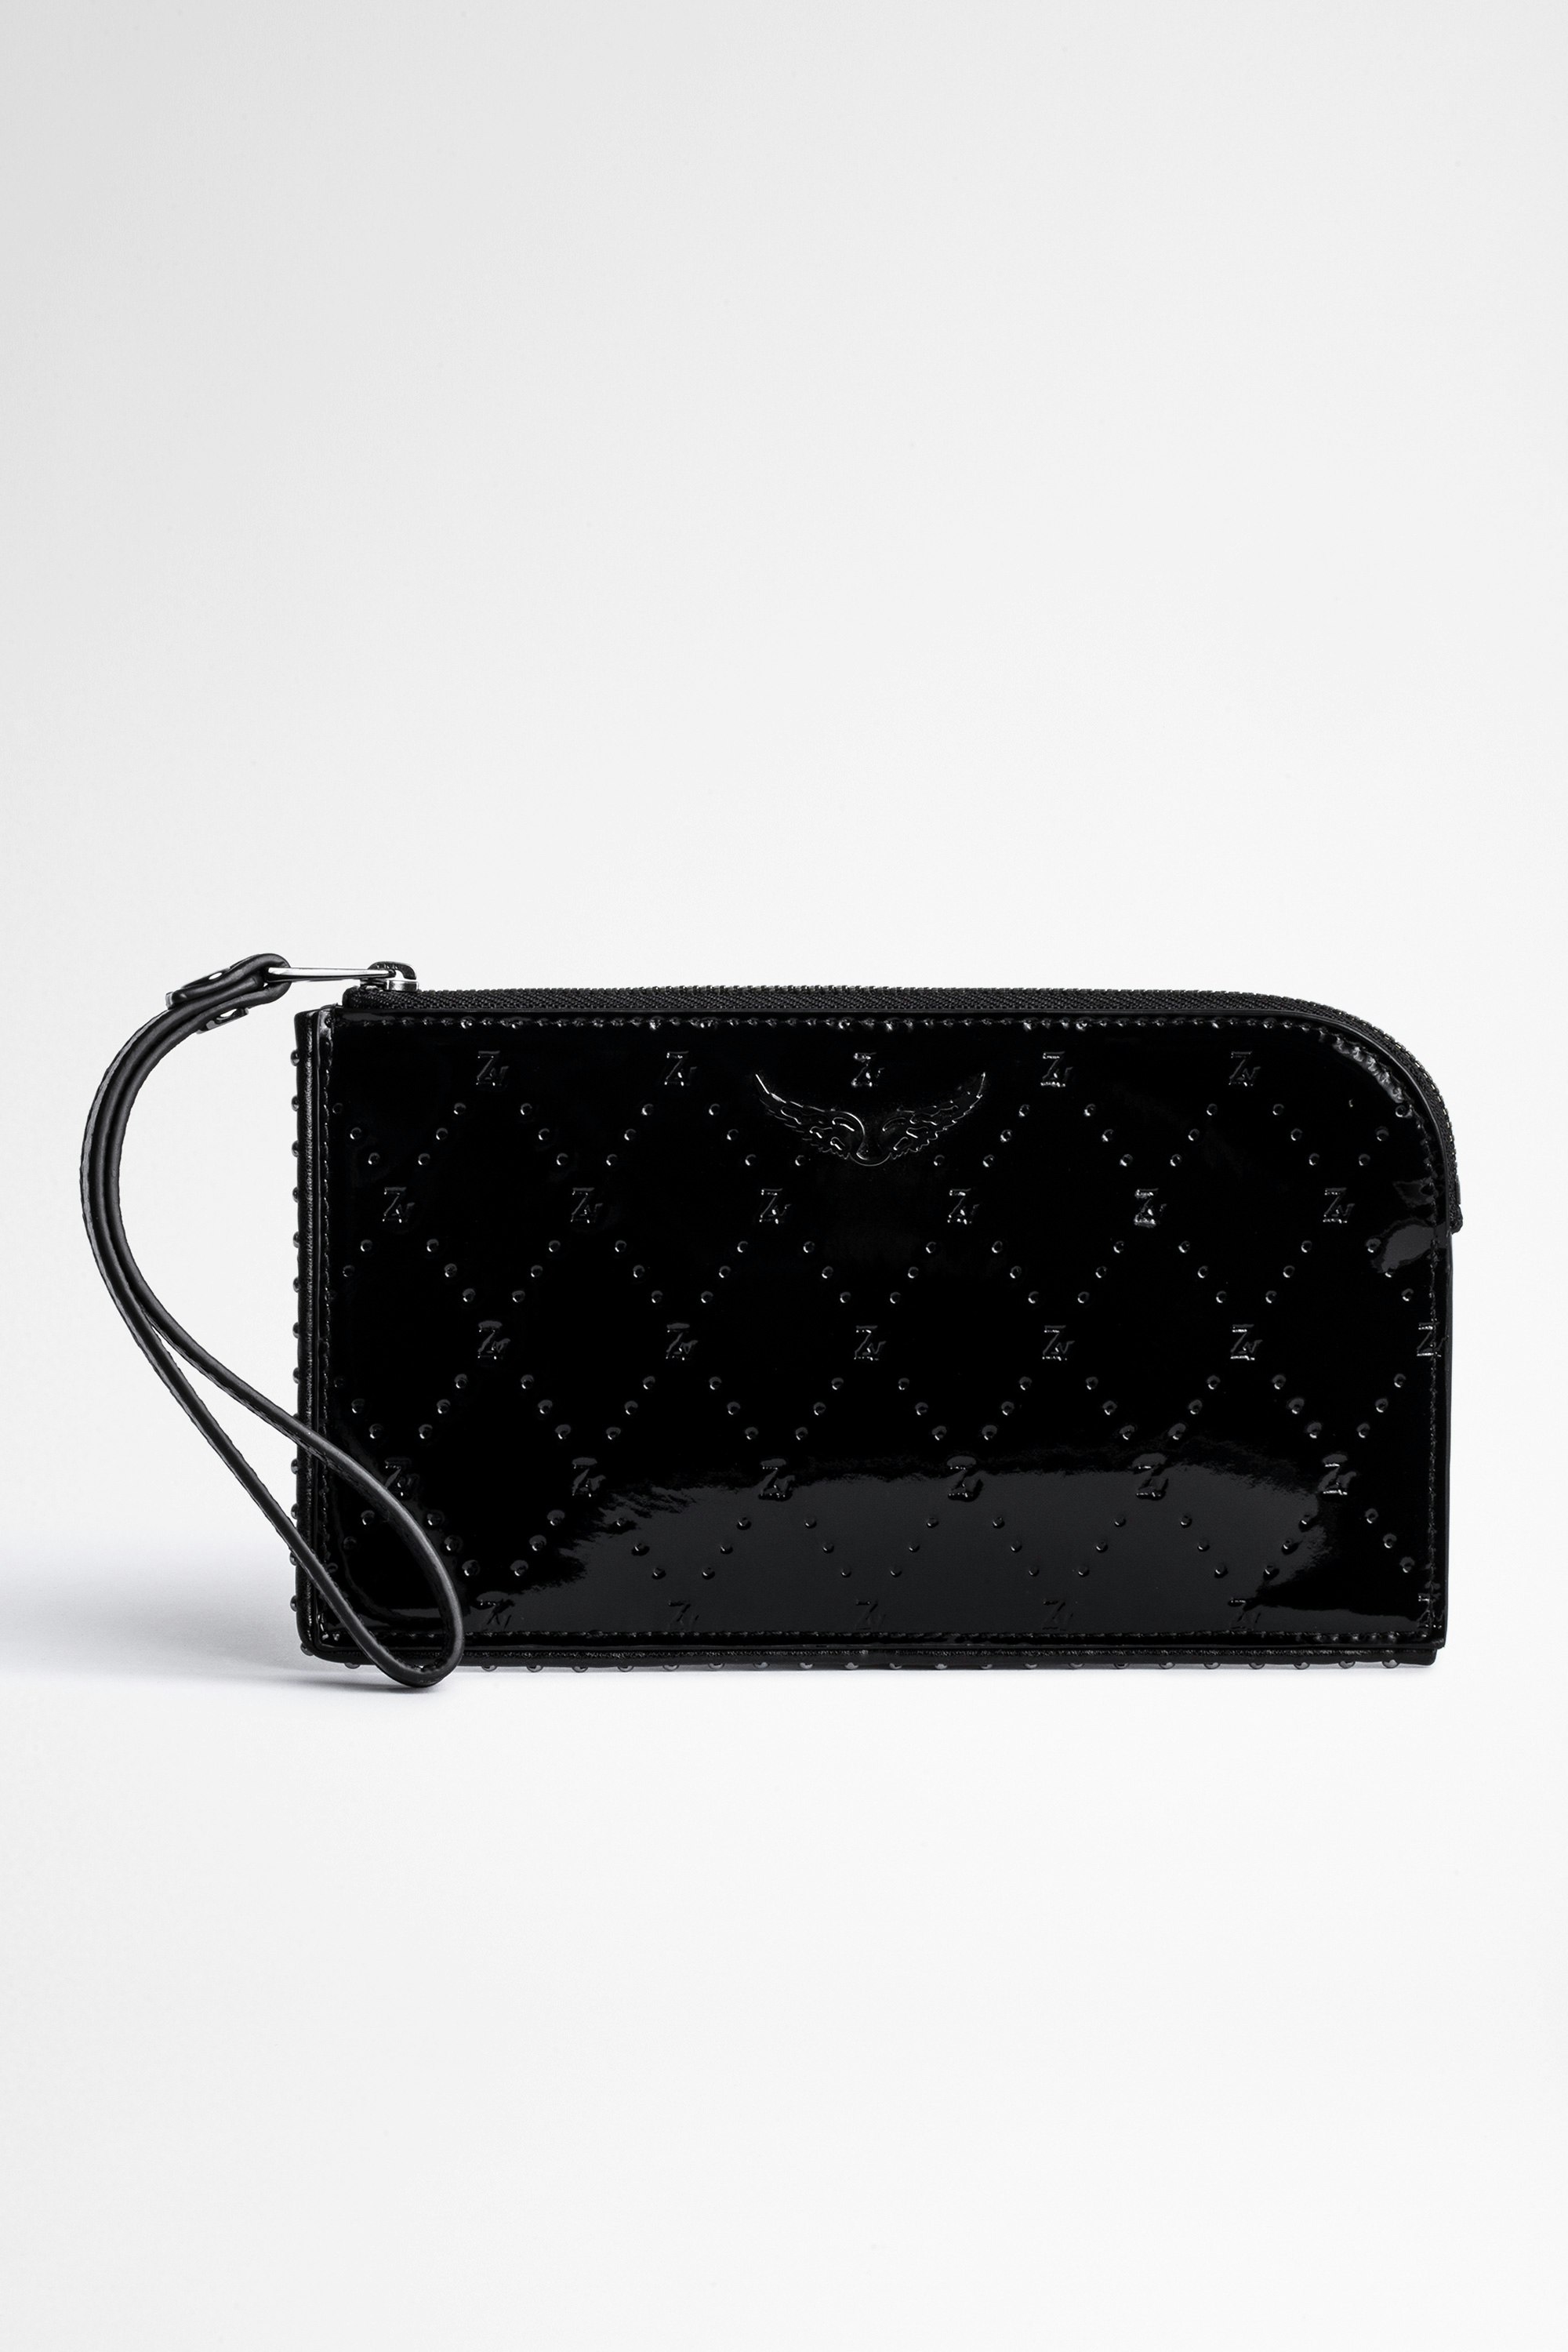 Embossed Phone Wallet Black leather all-over Phone Wallet